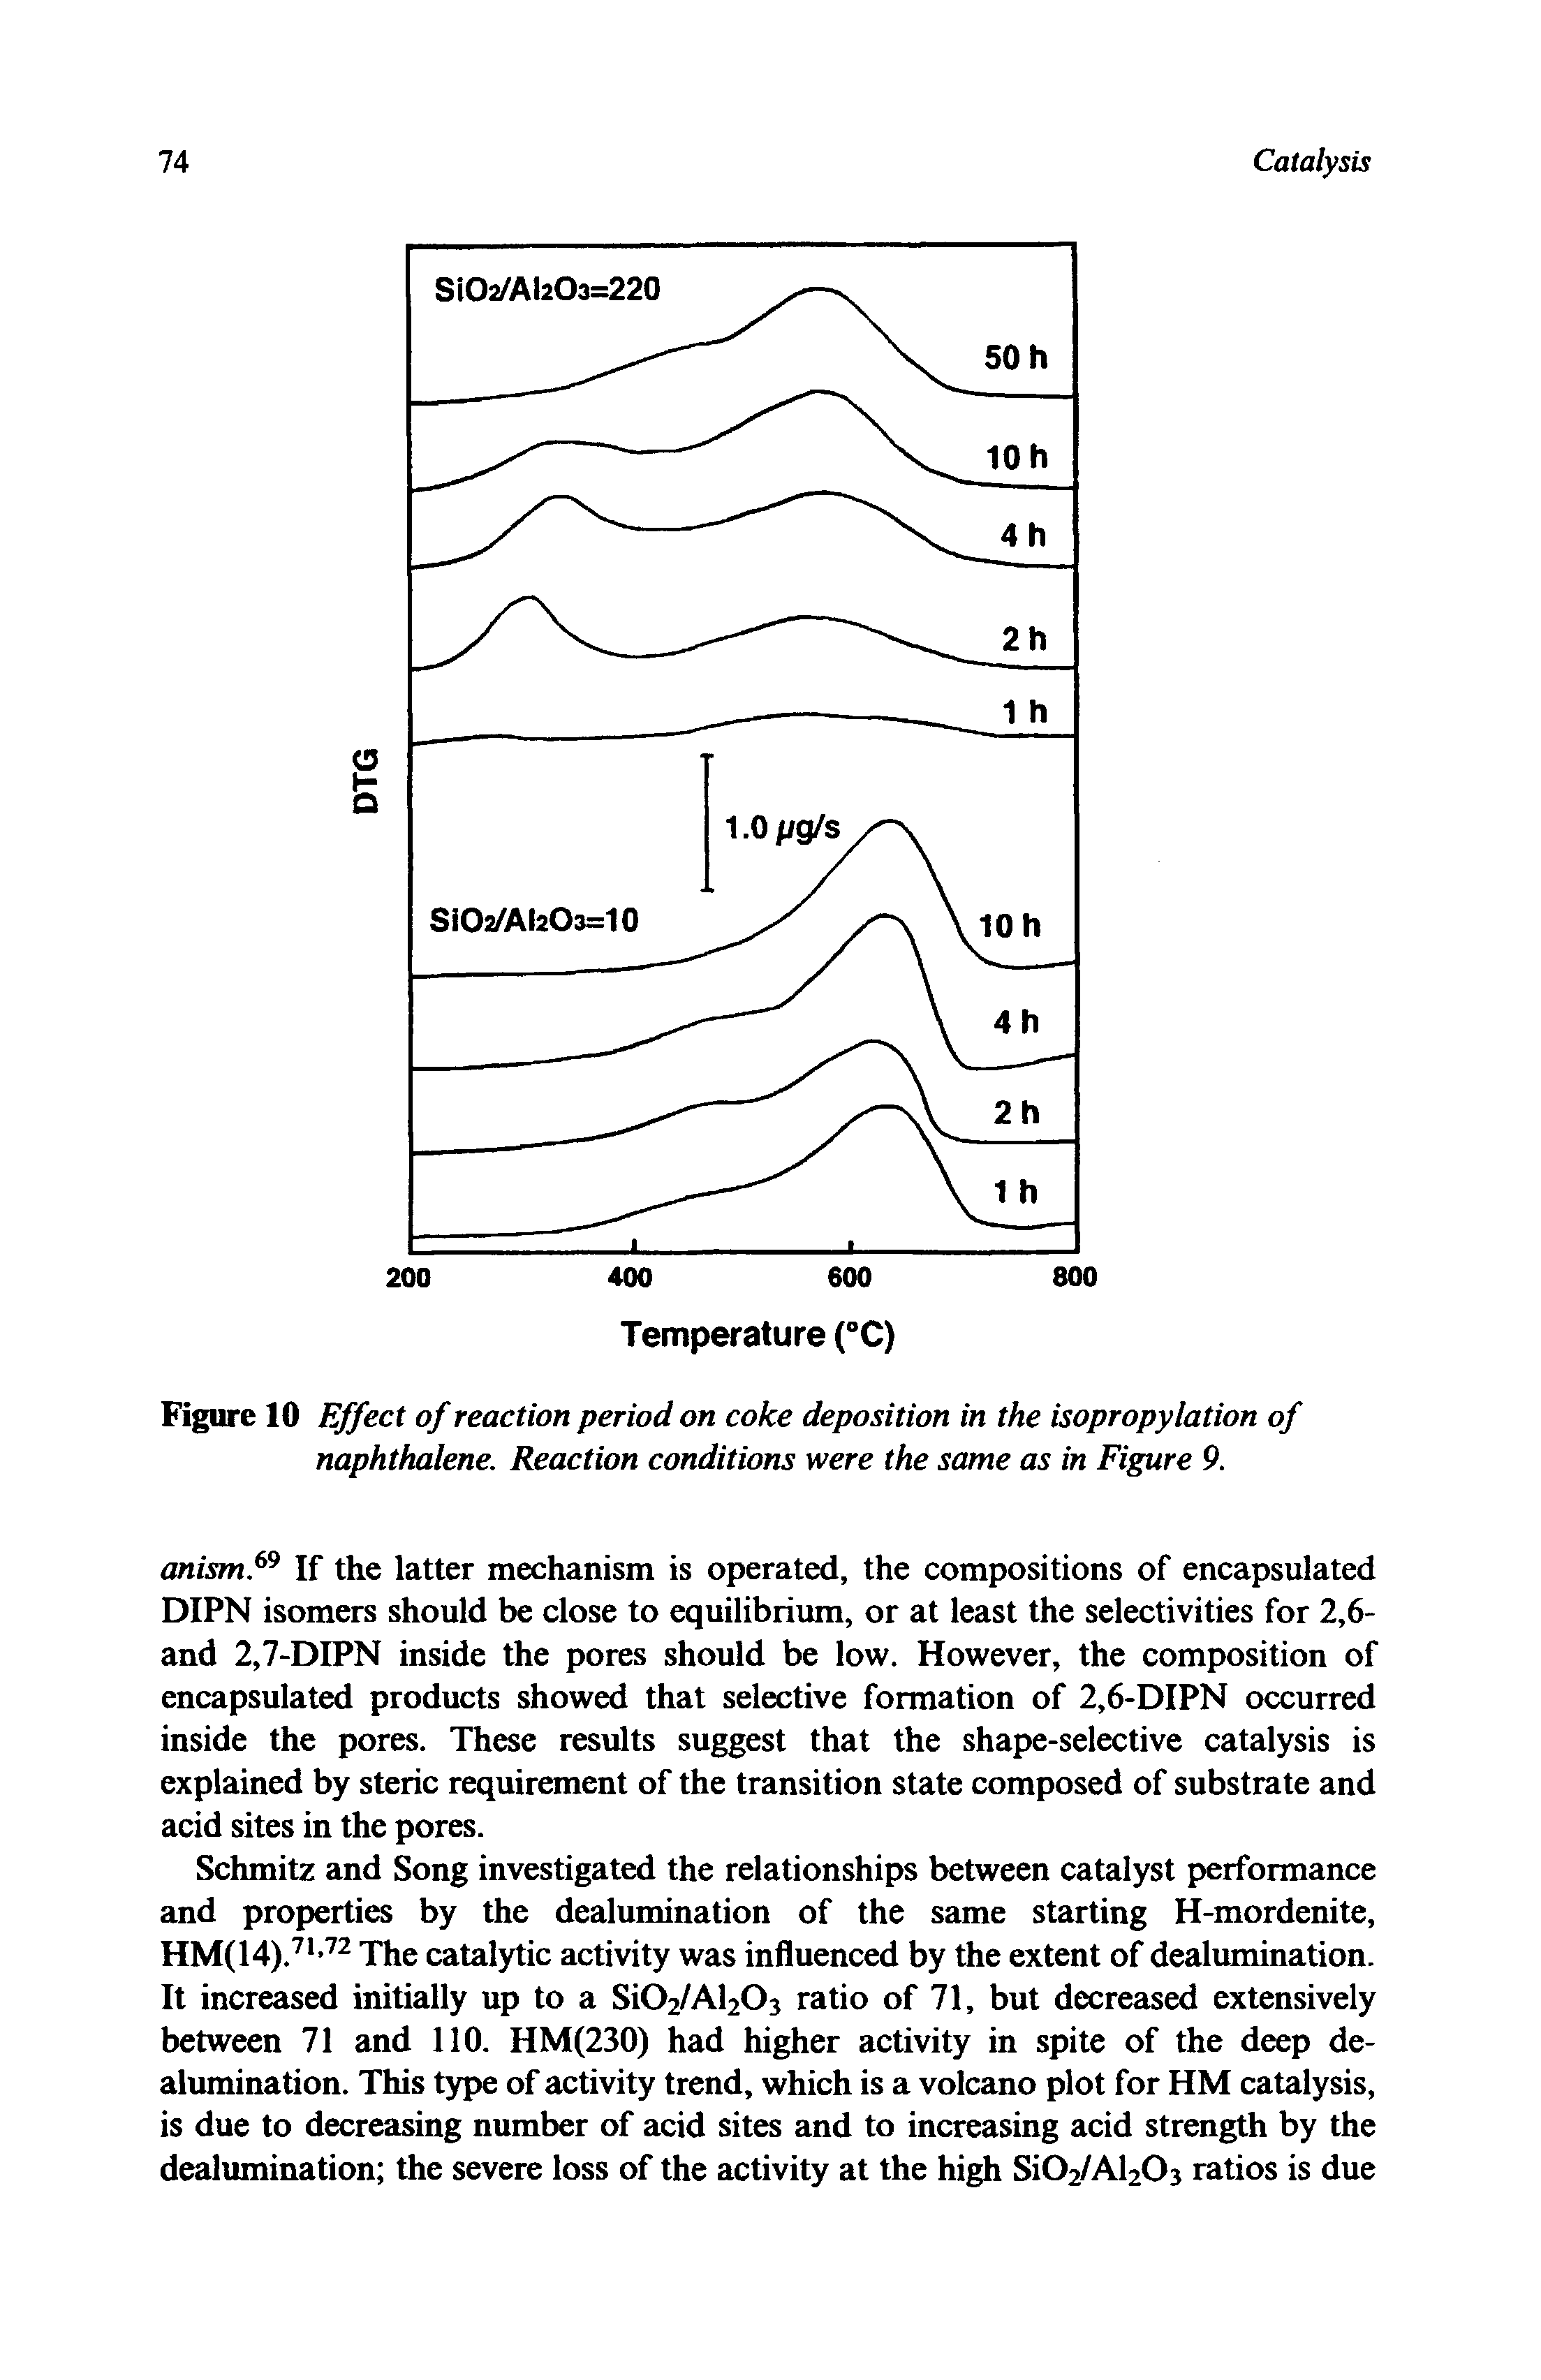 Figure 10 Effect of reaction period on coke deposition in the isopropylation of naphthalene. Reaction conditions were the same as in Figure 9.